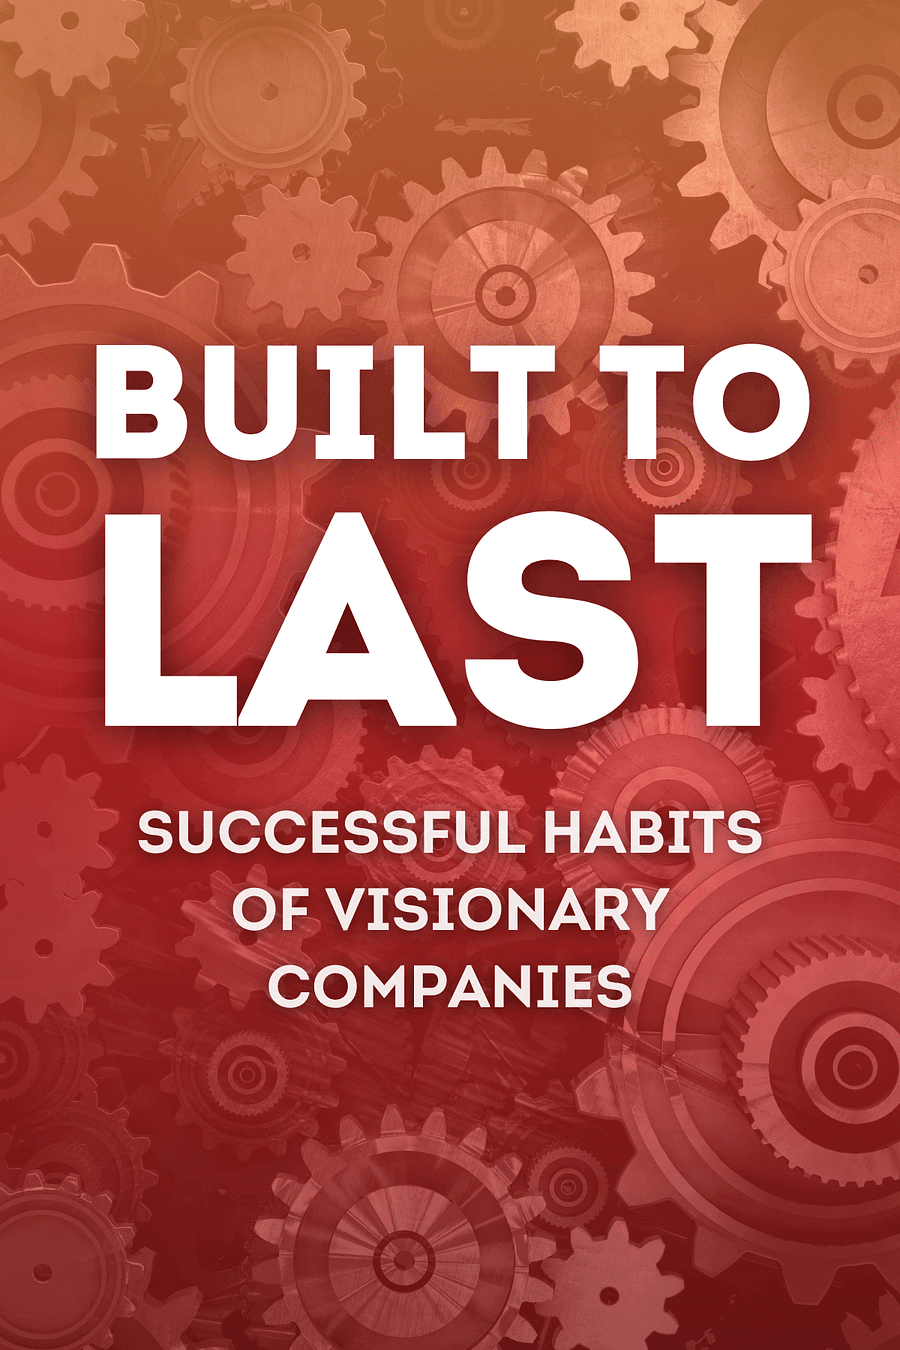 Built to Last by Jim Collins, Jerry I. Porras - Book Summary